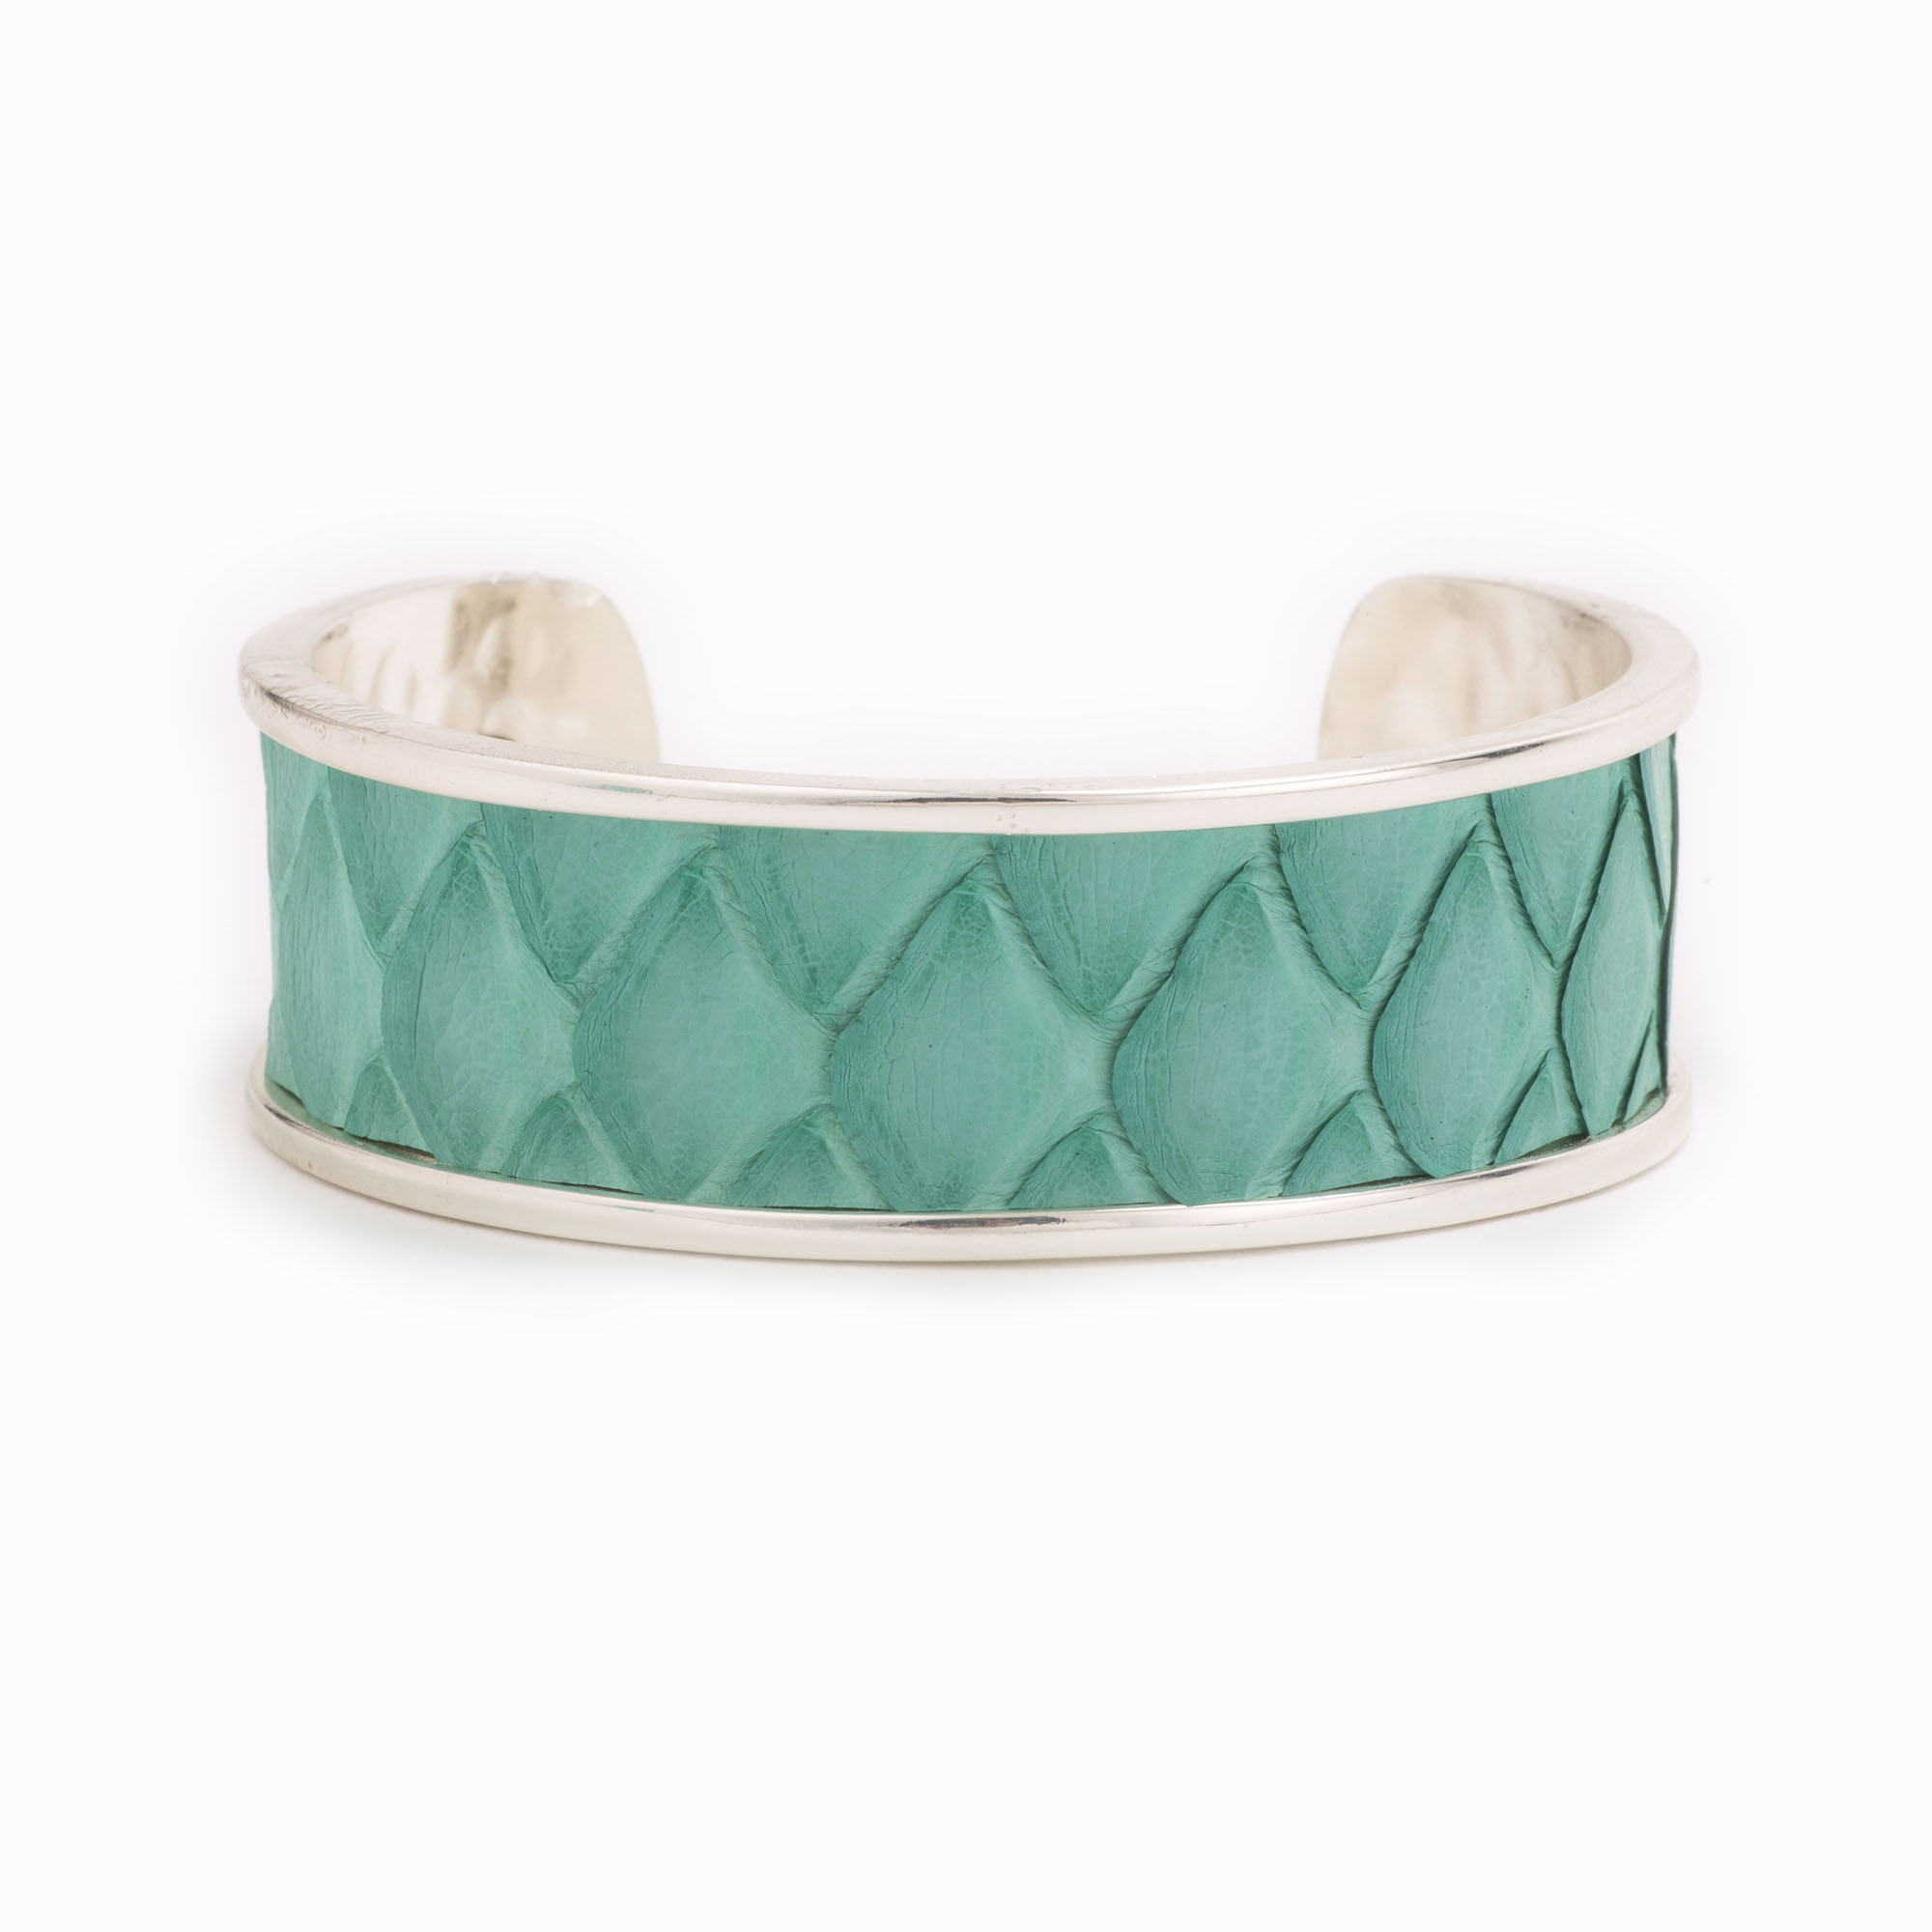 A medium silver cuff with turquoise colored snakeskin pattern inlaid.